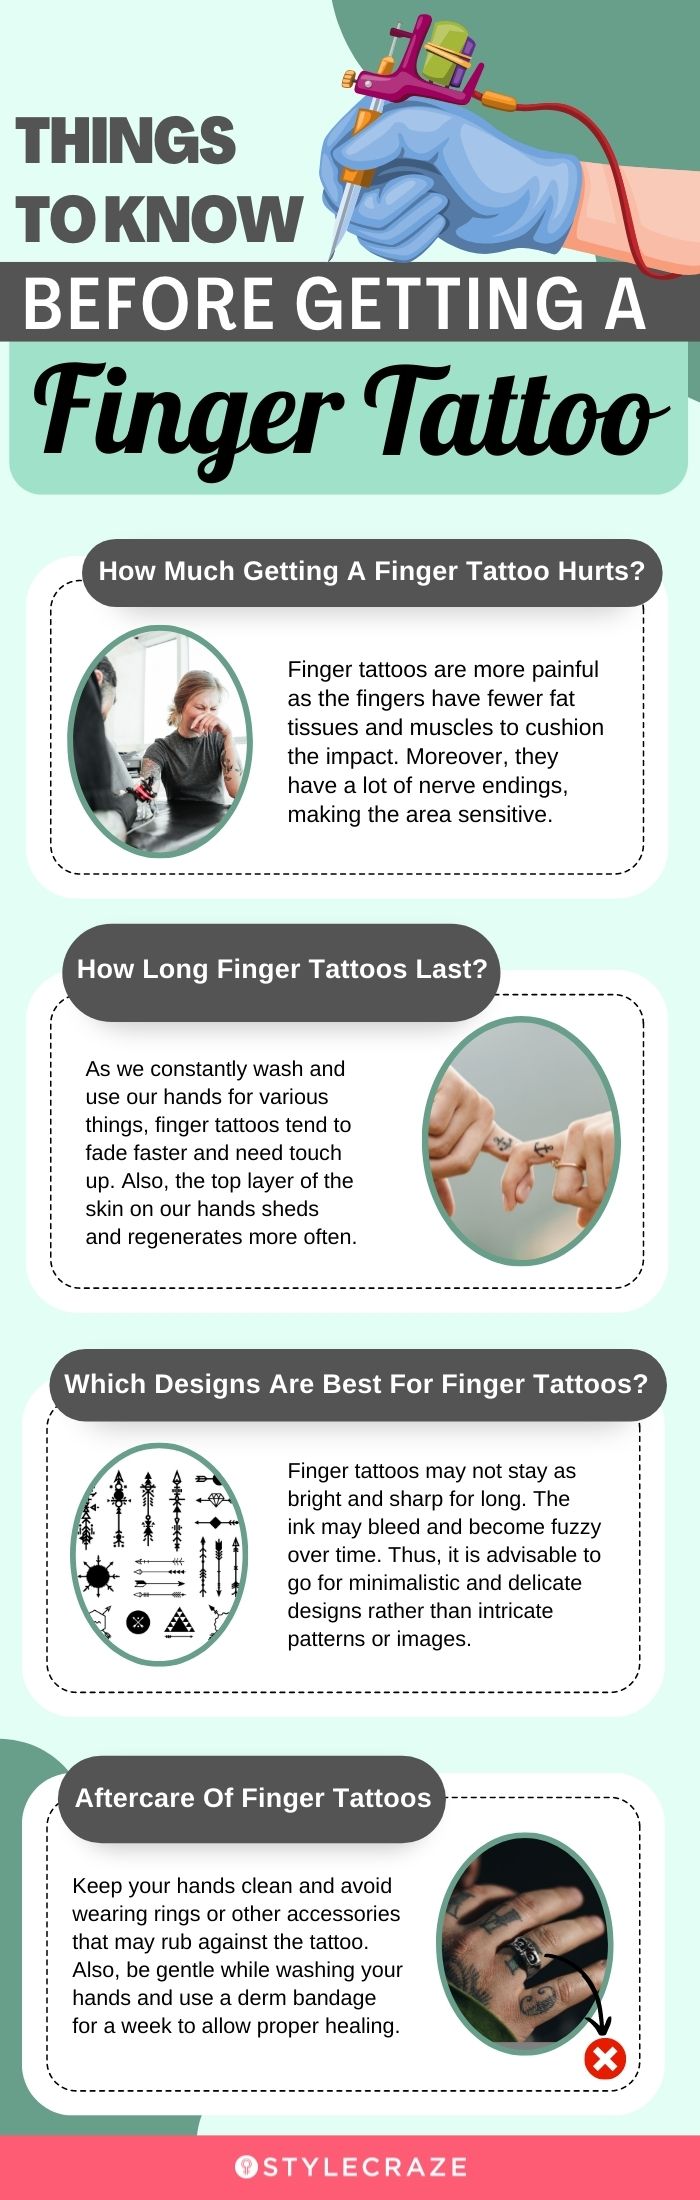 things to know before getting a finger tattoo [infographic]